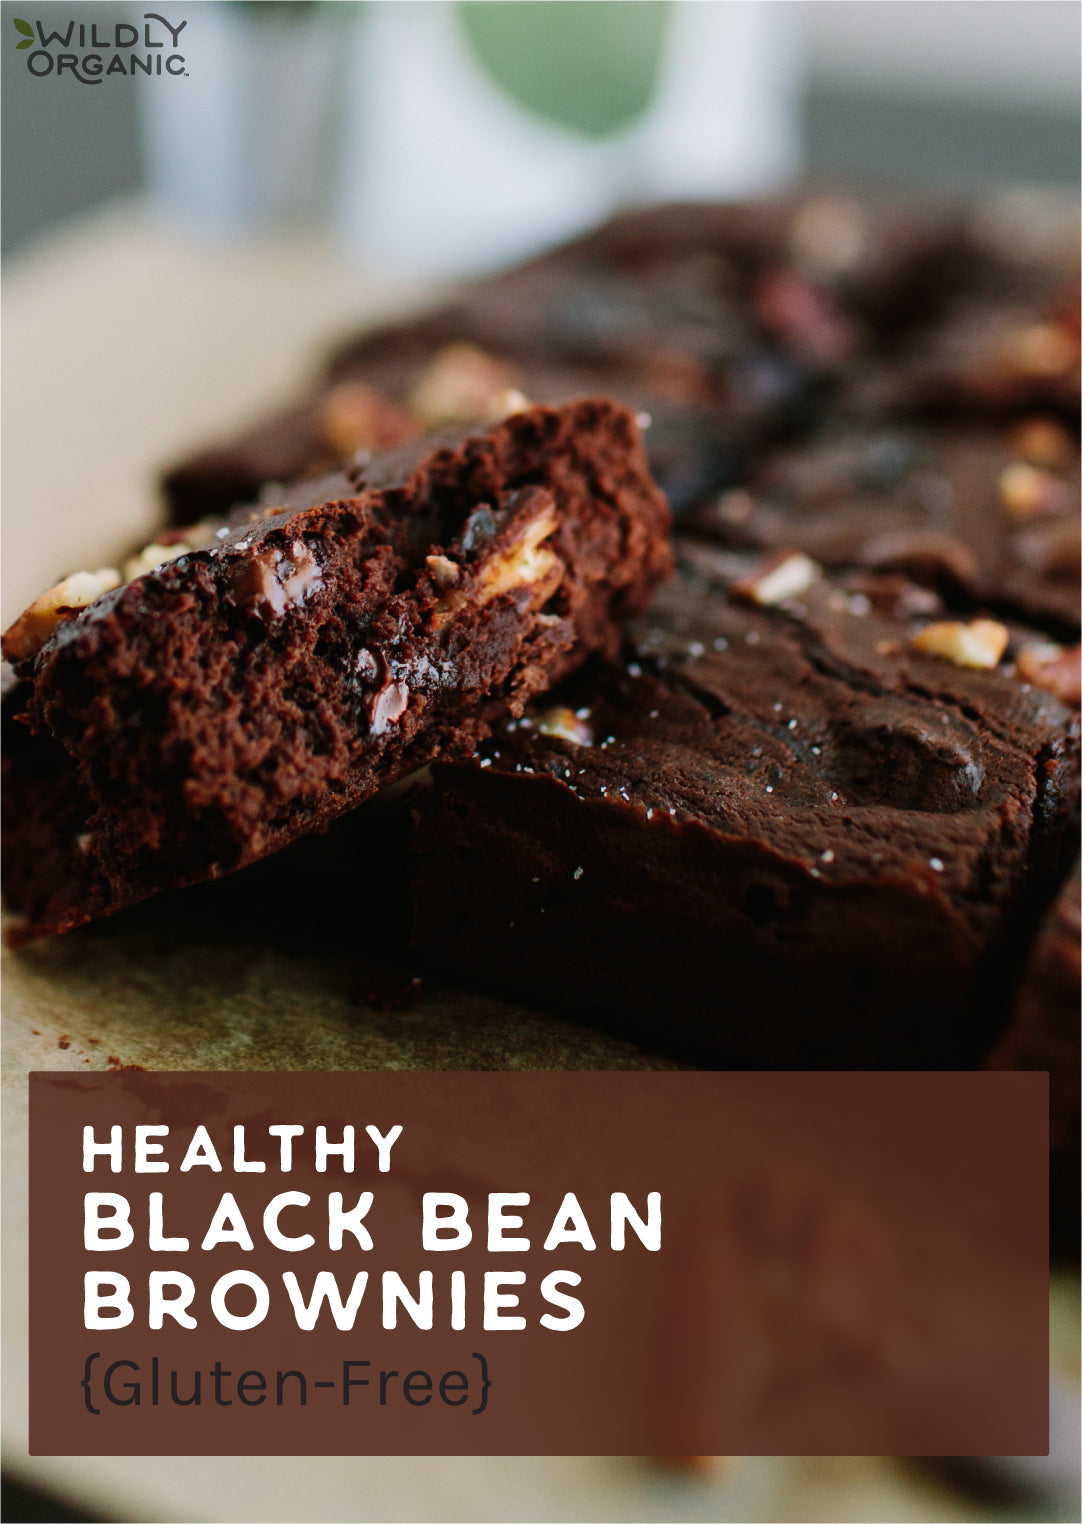 a close-up of healthy black bean brownies and wildly organic packaging in the background